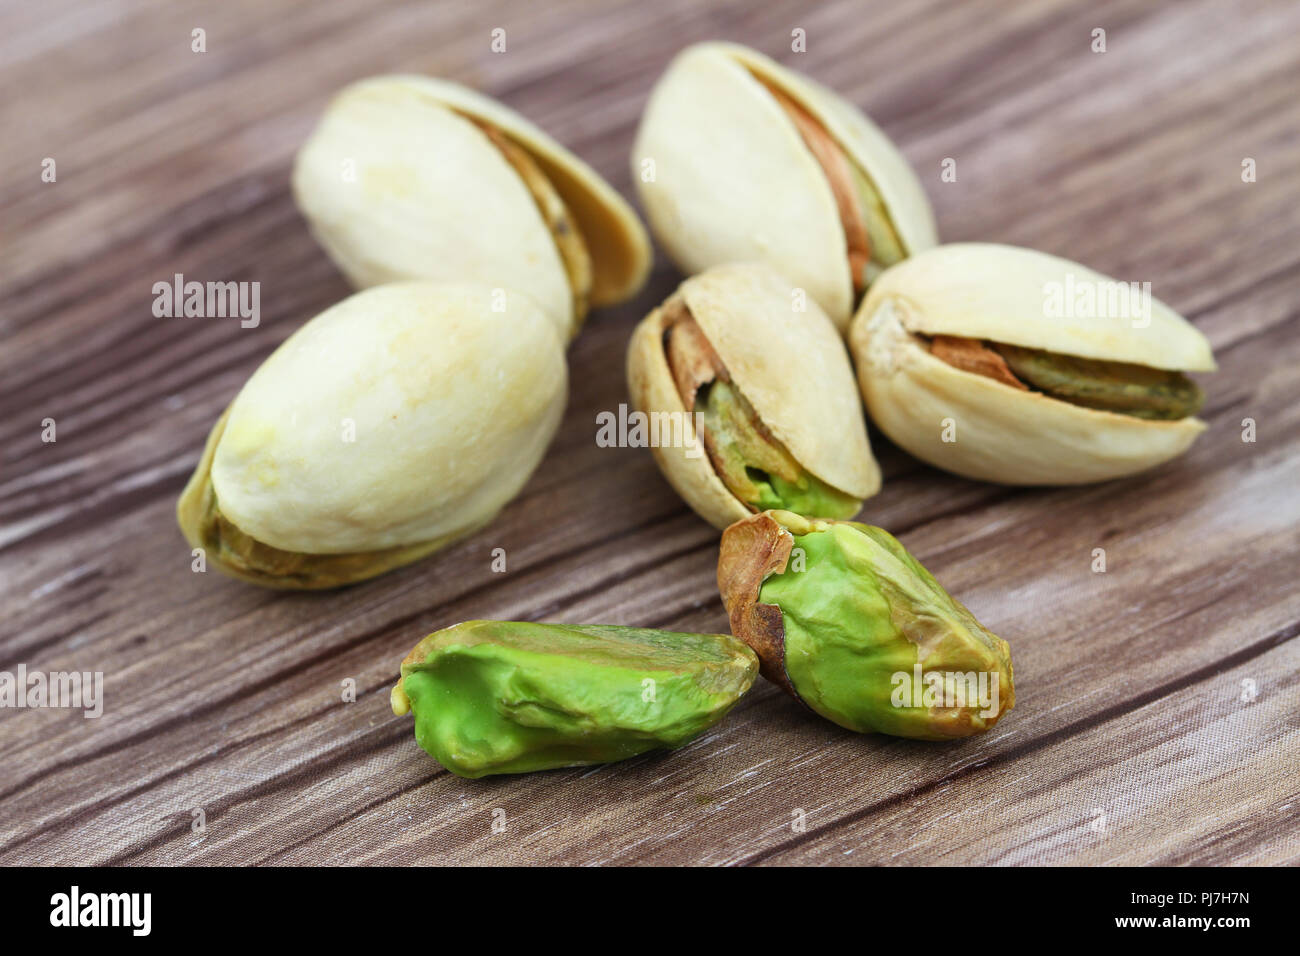 Close up of few pistachios on wooden surface Stock Photo